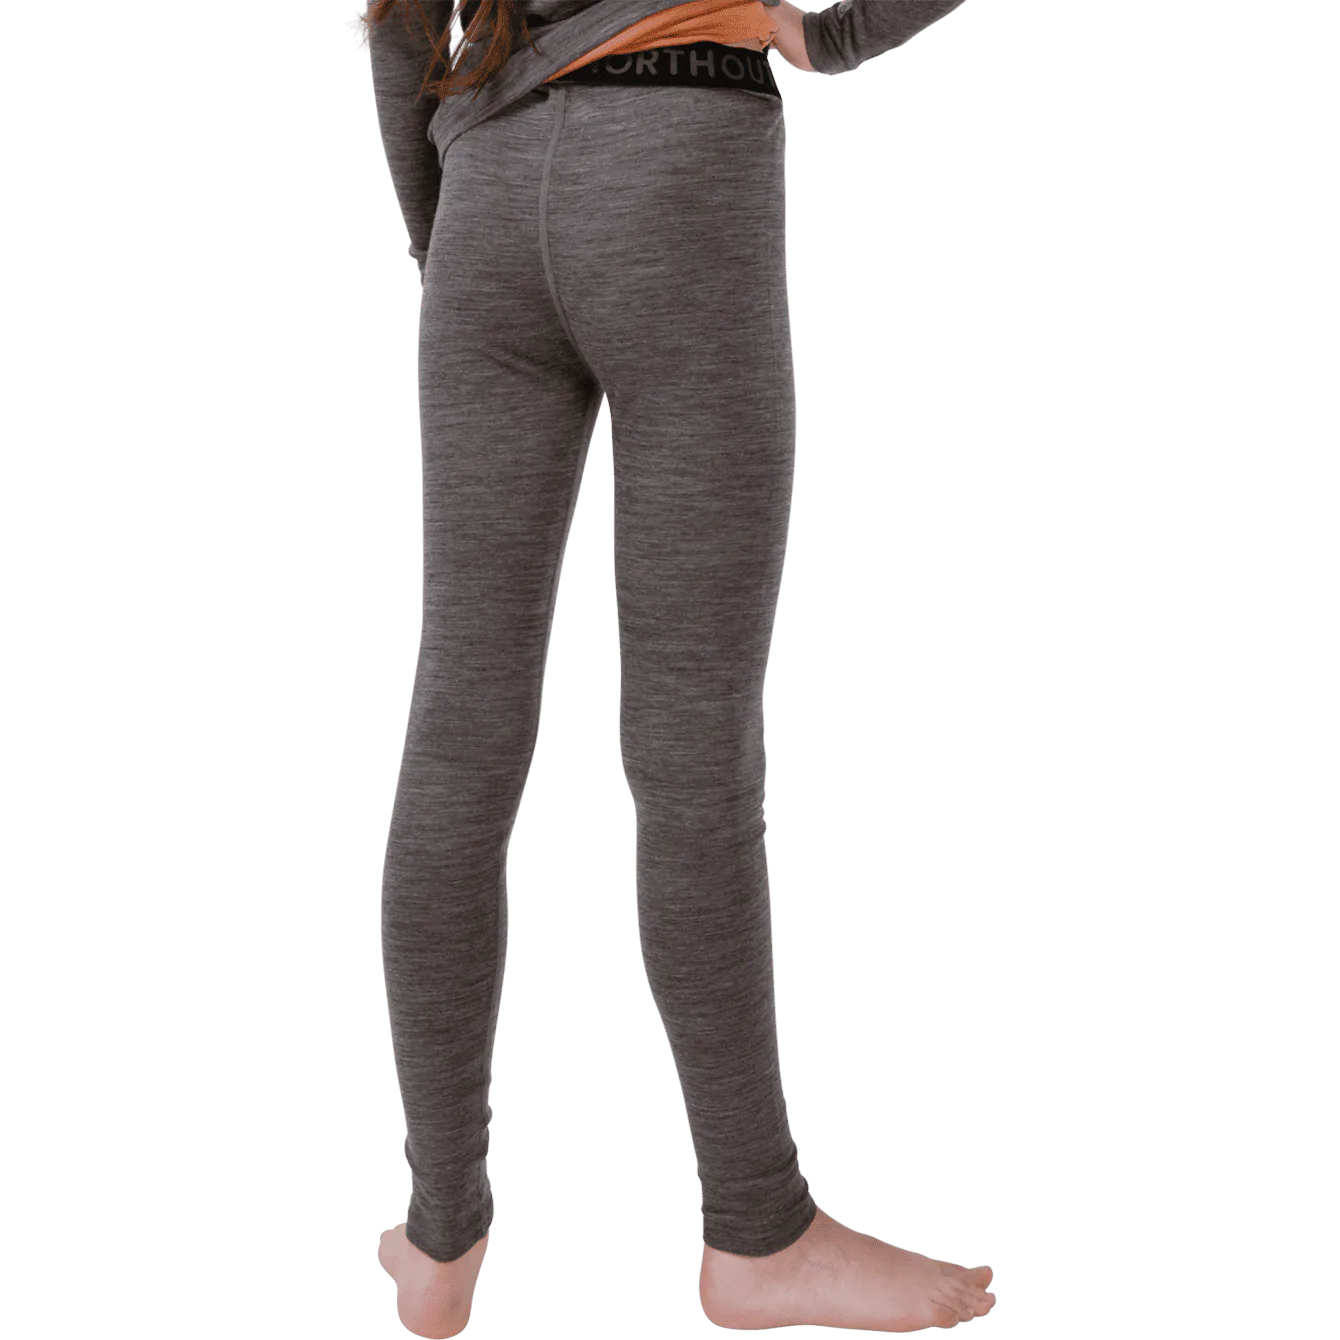 north-outdoor-sensitive-225-youth-pants-grey-salmon-pose-2-back-fw19-n52002g02_1800x1800